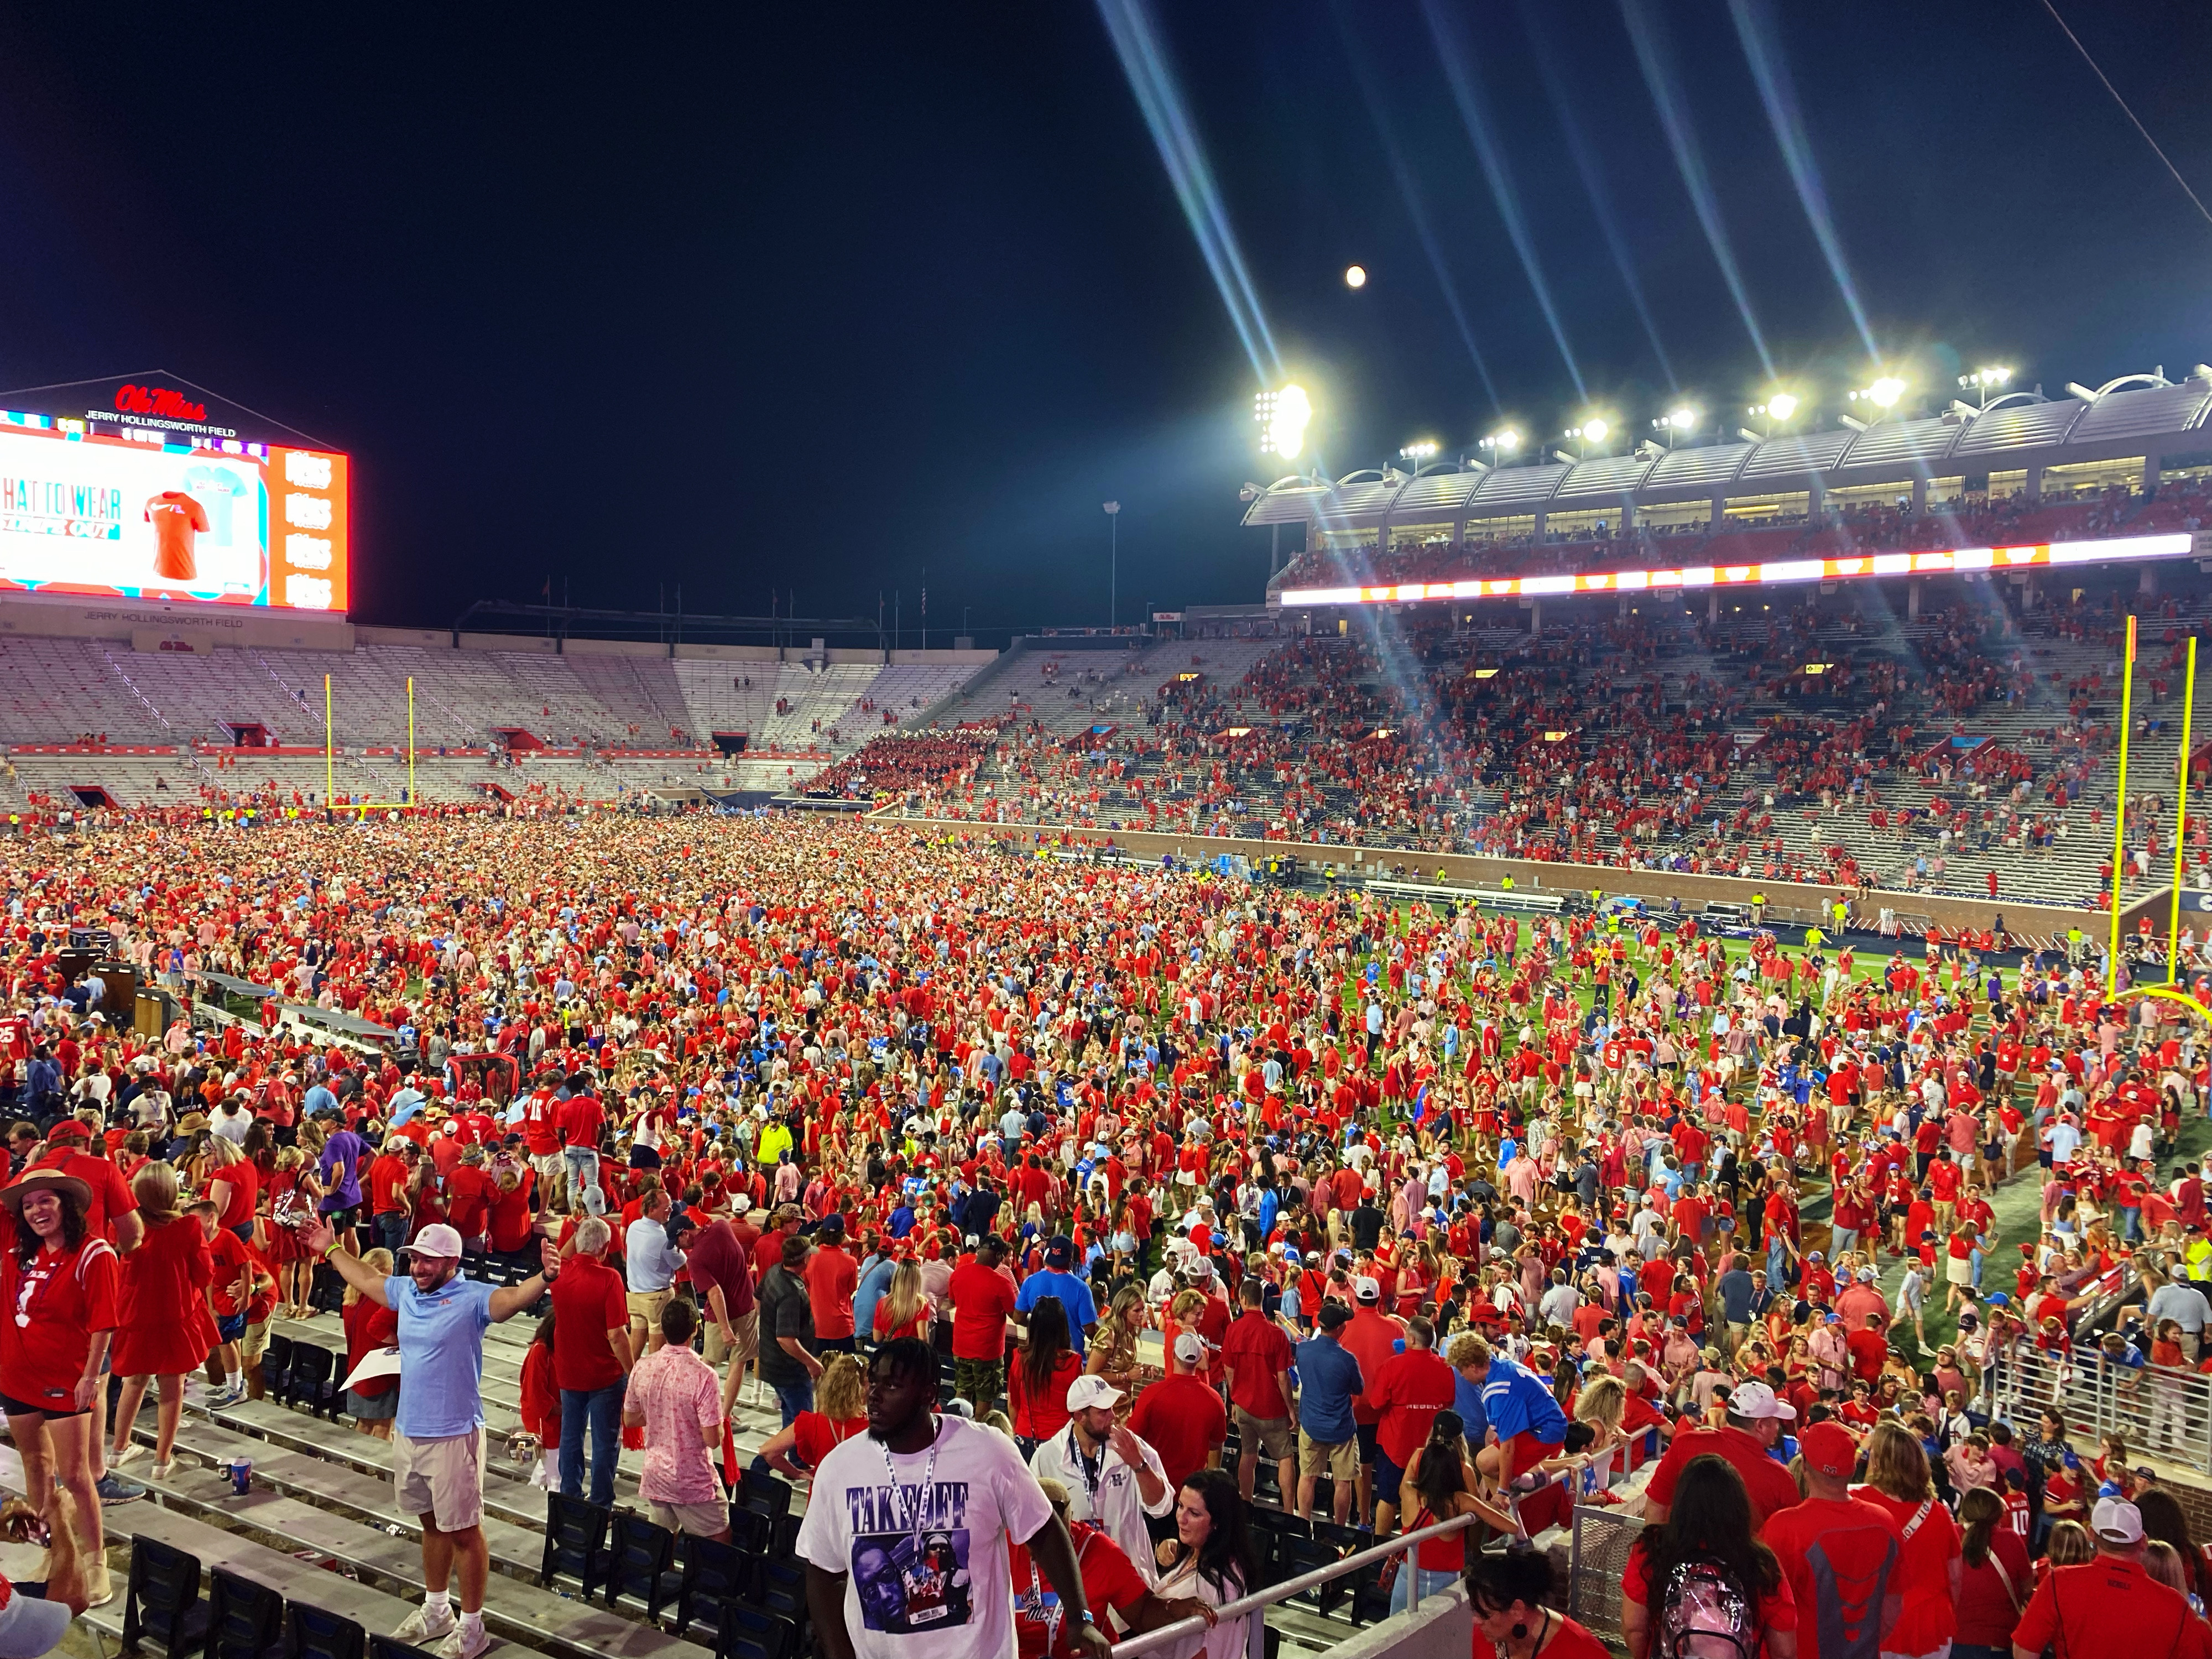 Ole Miss fans stormed the field after knocking off their rival LSU Tigers on Saturday night.